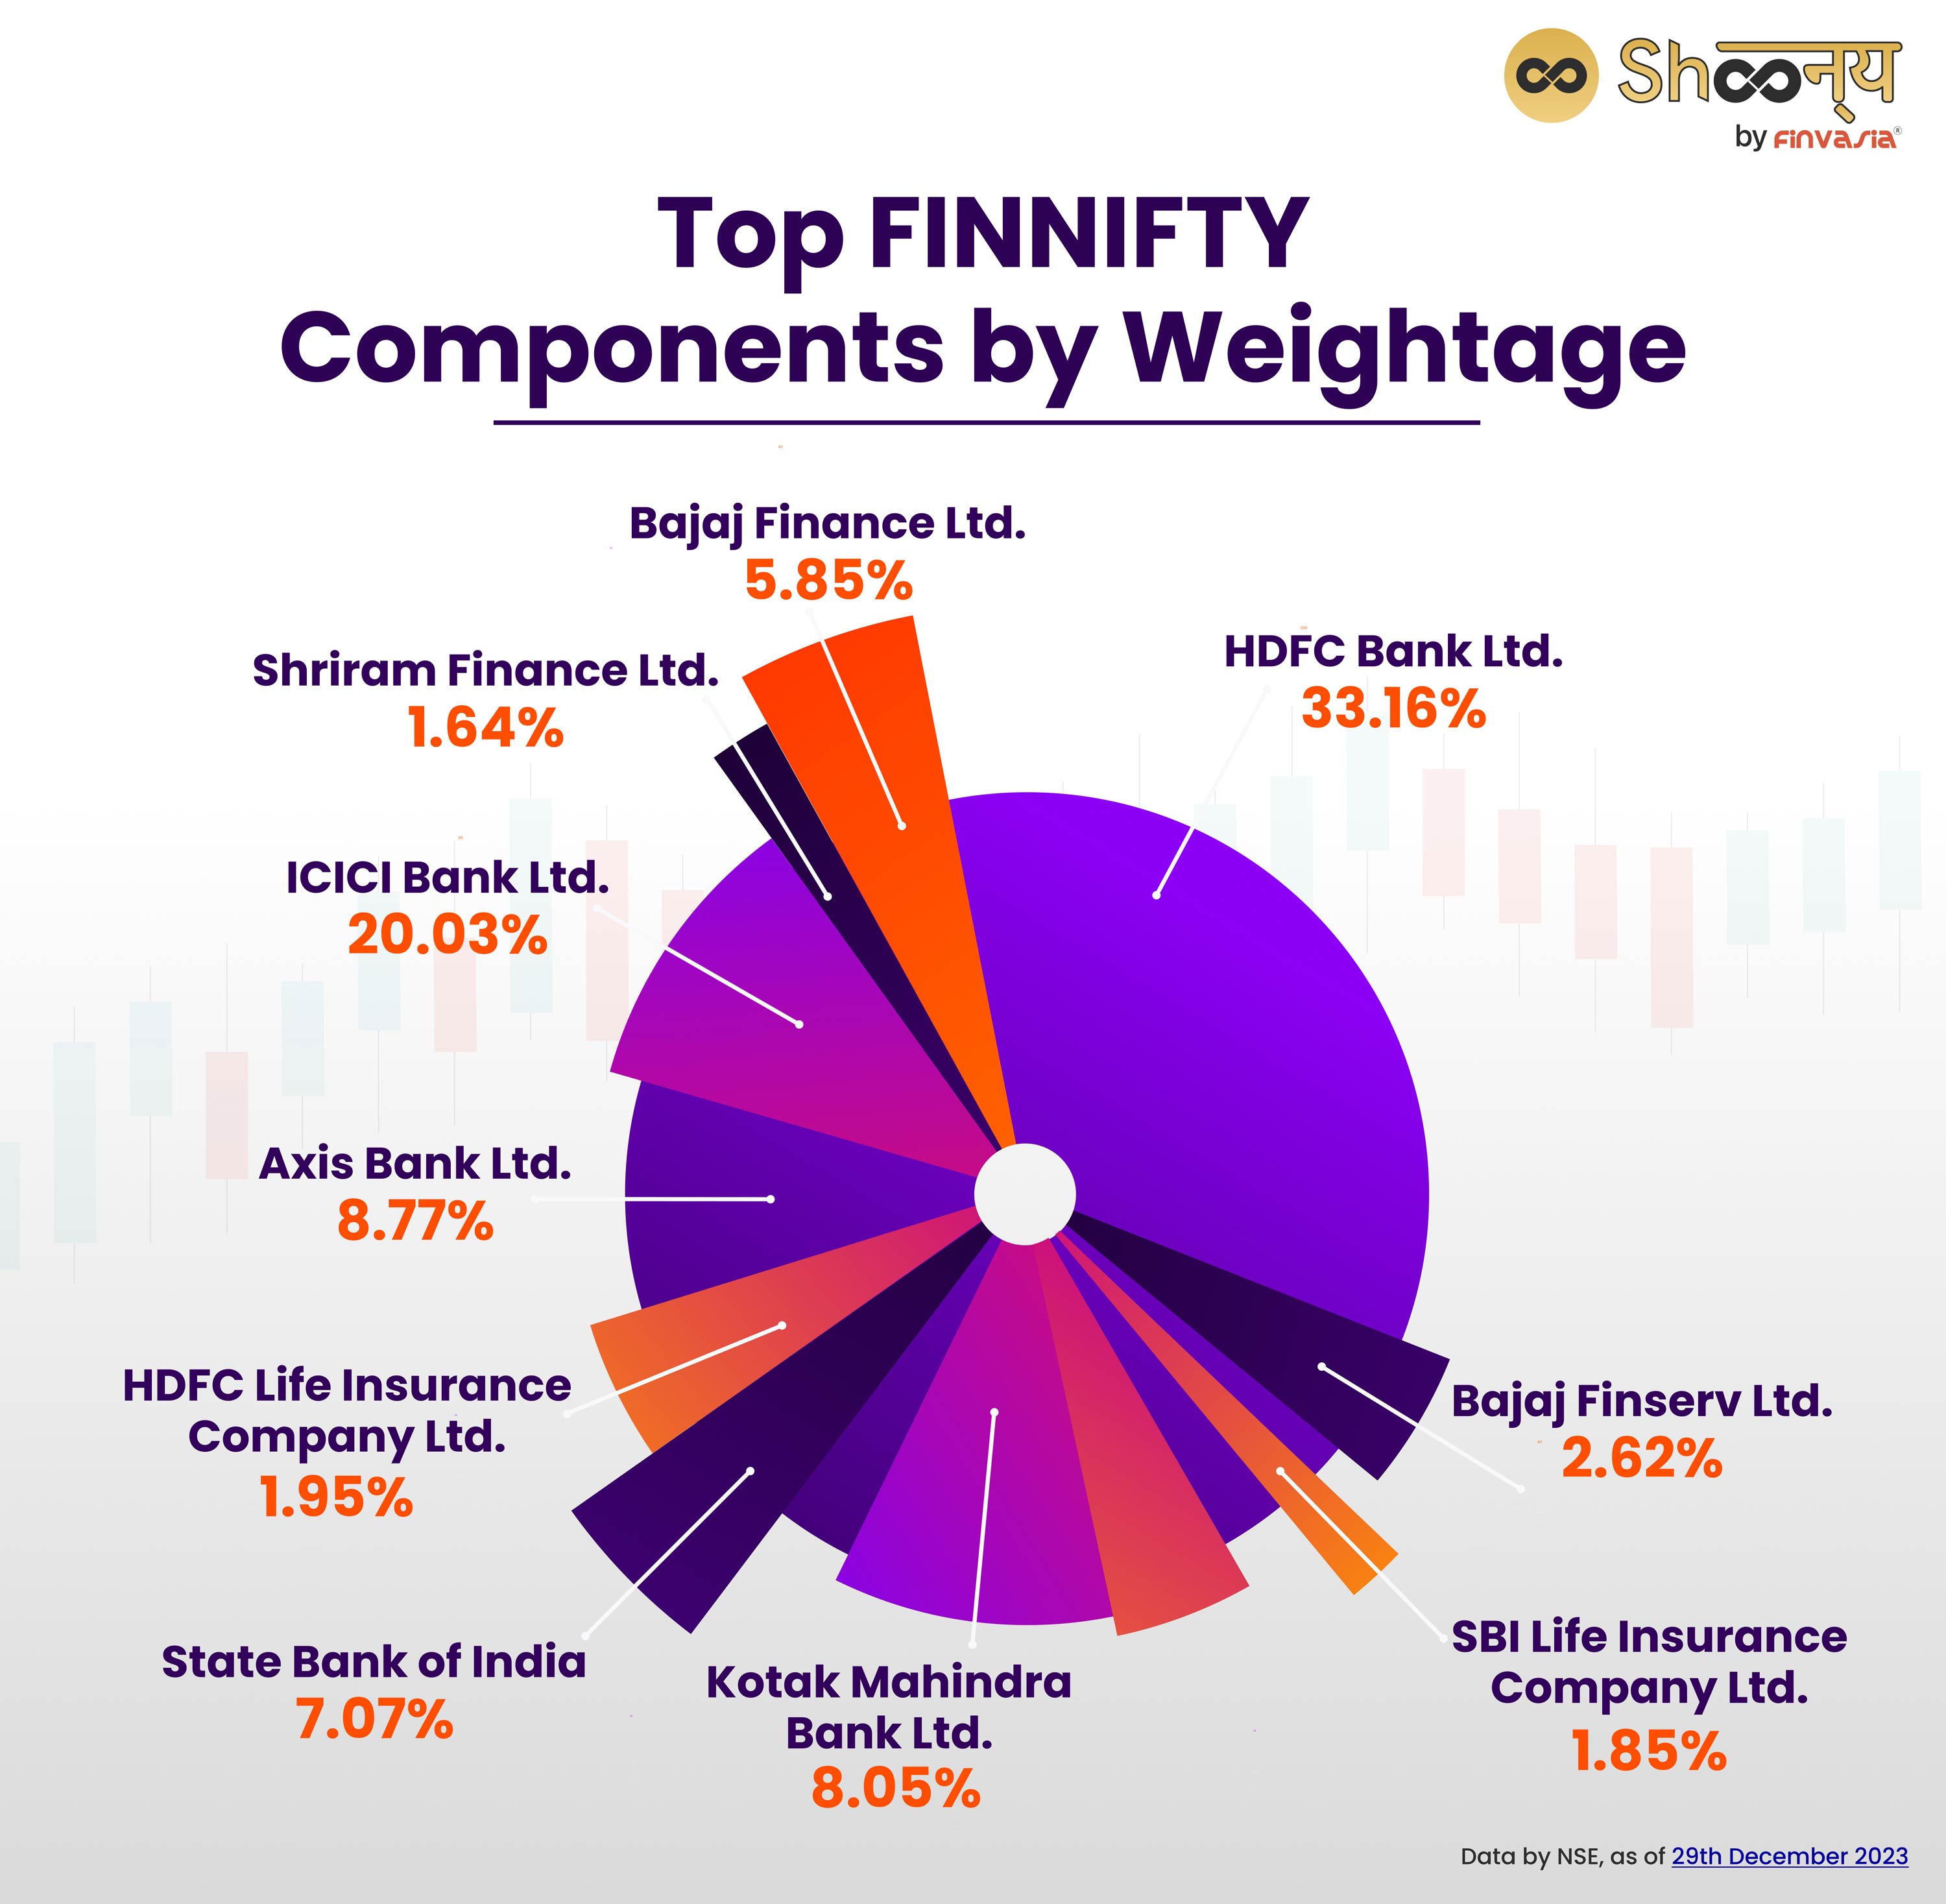 Top FINNIFTY Components by Weightage